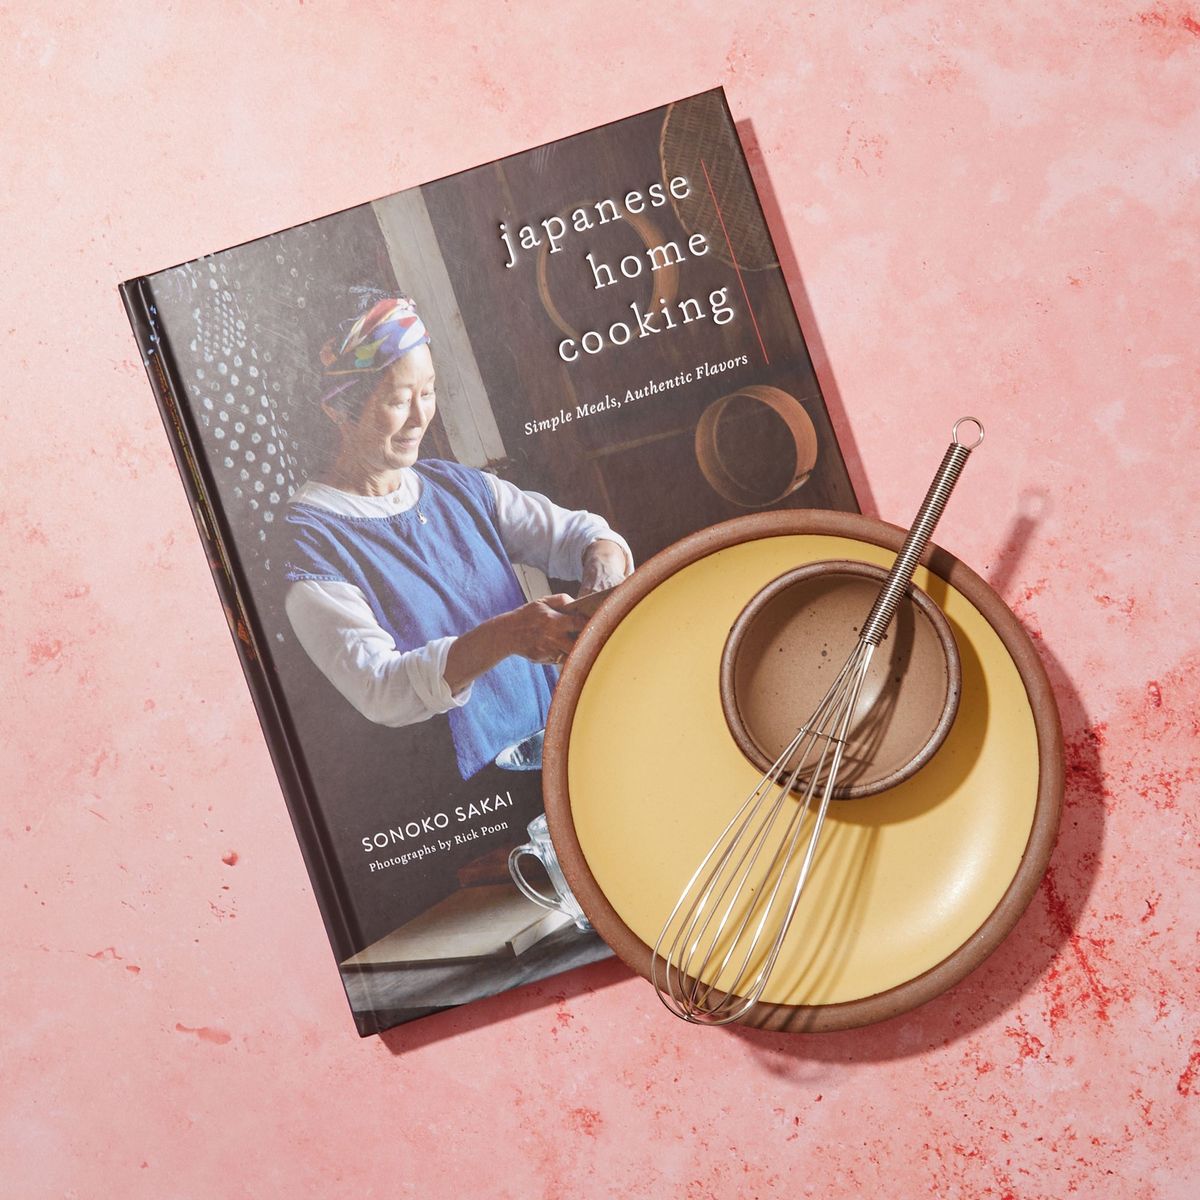 A plate and mini whisk rest on a a cookbook. The book's front cover is a photo of an older Japanese woman cooking with a title that reads "Japanese Home Cooking"